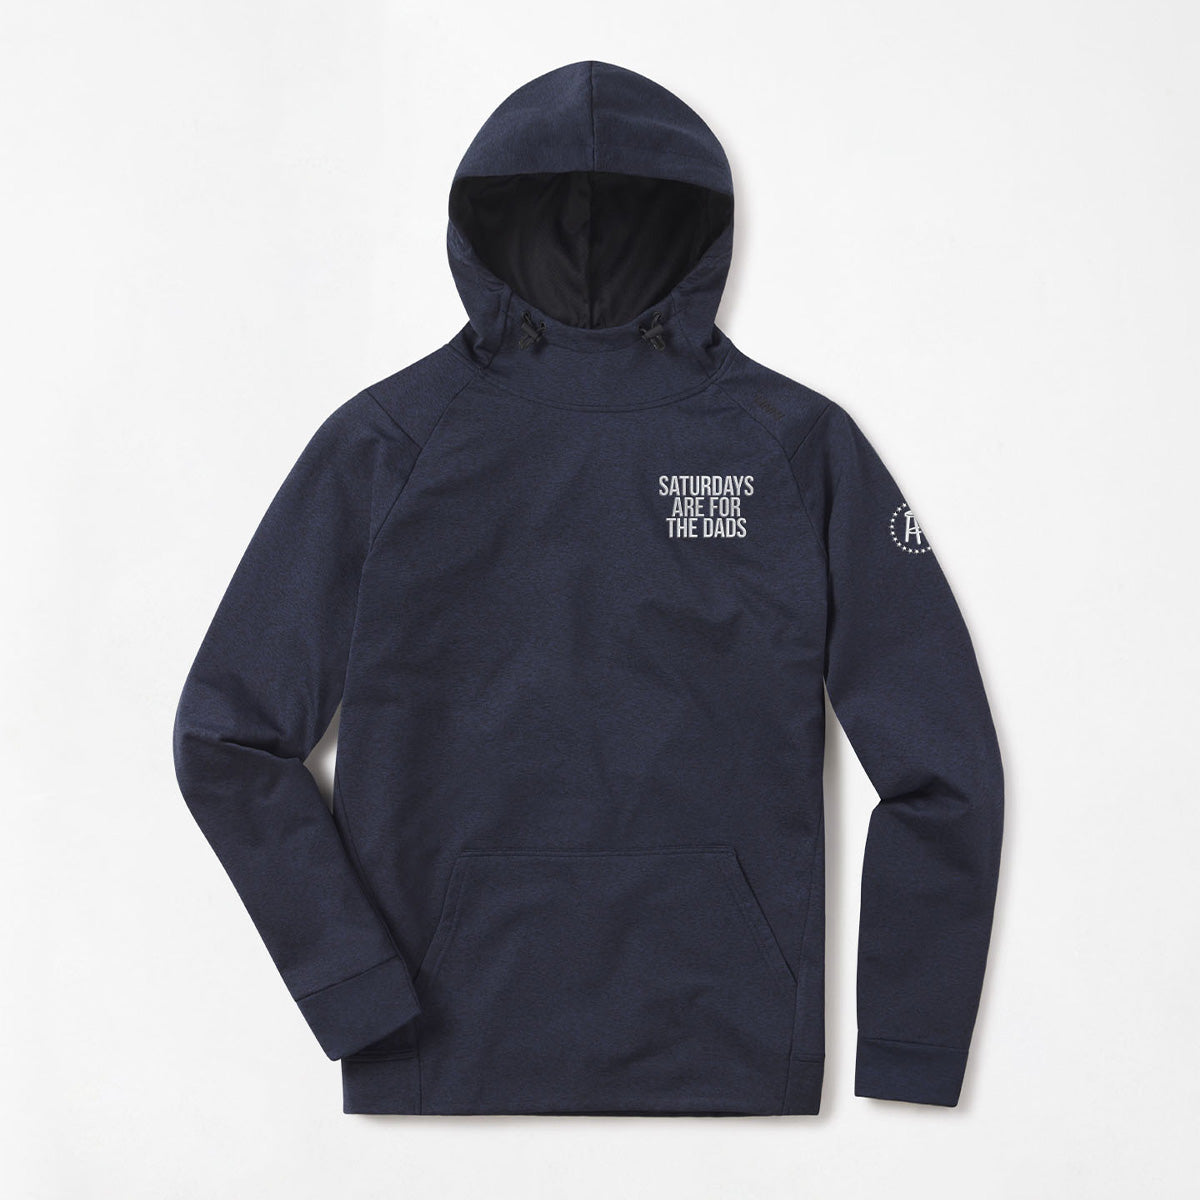 UNRL x Saturdays Are For The Dads Crossover Hoodie II-Hoodies-SAFTB-Barstool Sports